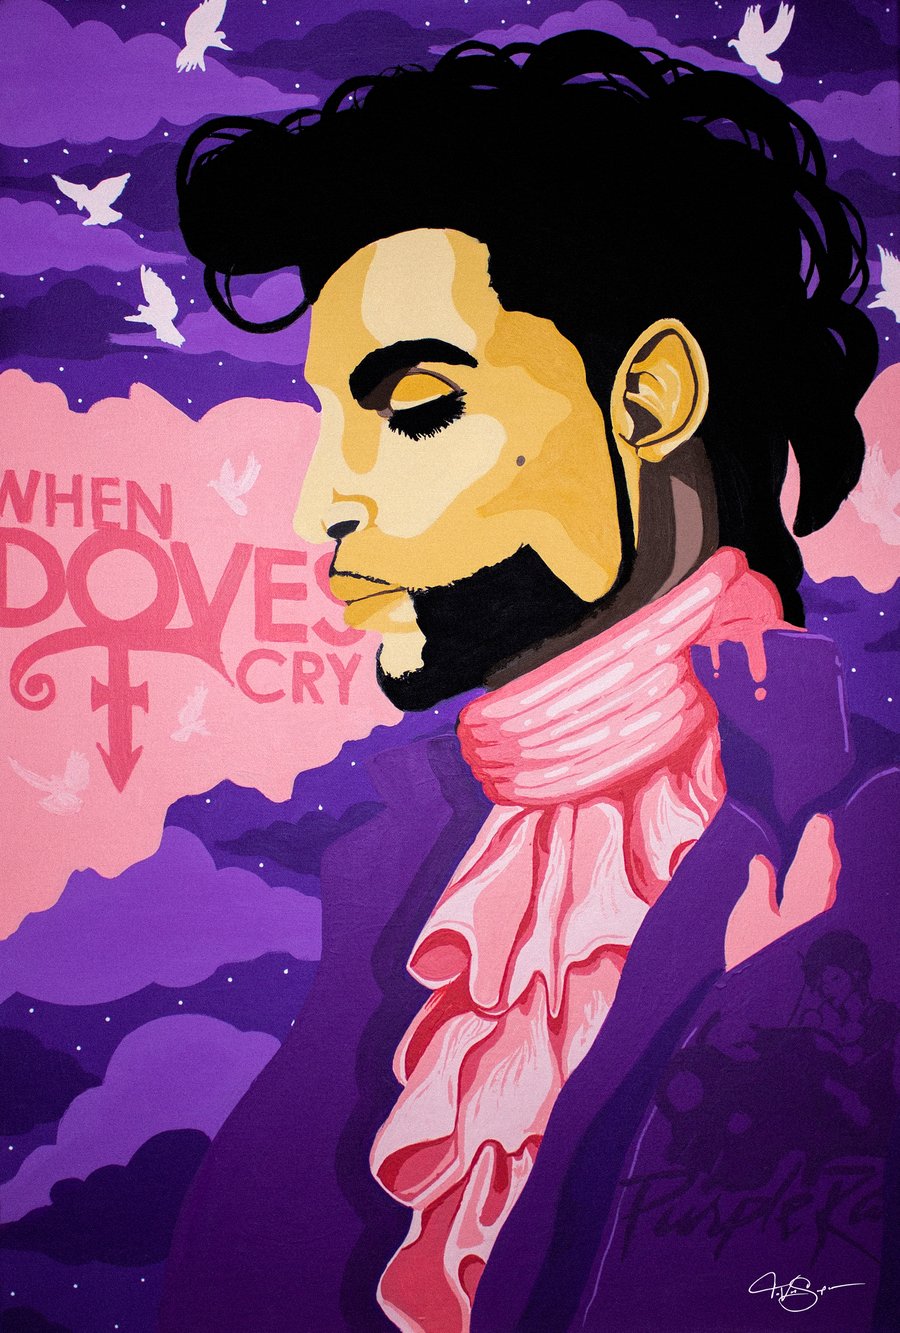 Image of "PRINCE" 18x24 Limited edition print